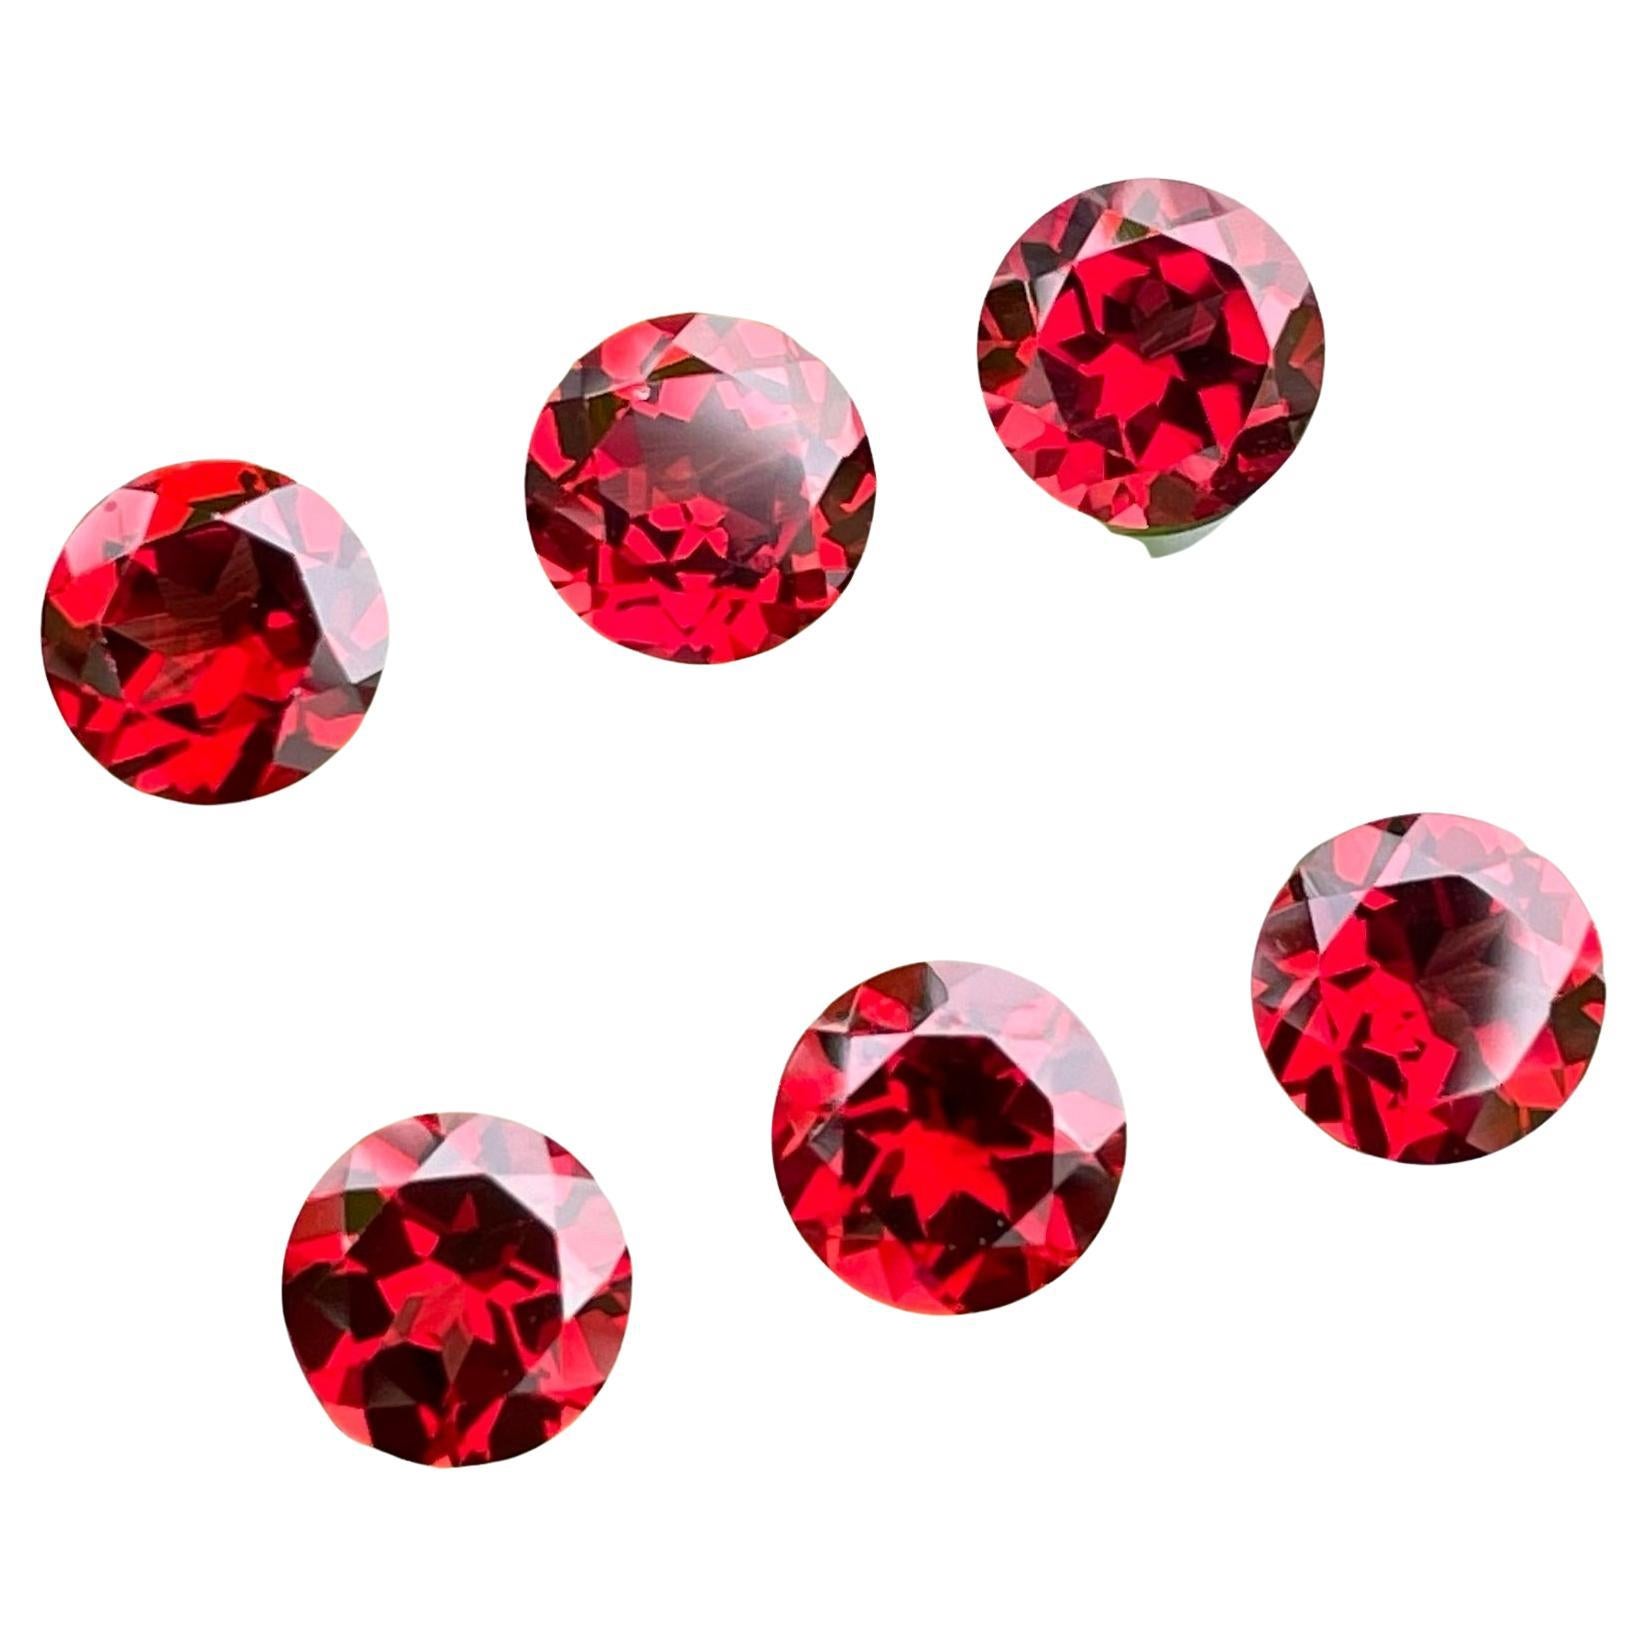 Excellent Cut Red Garnet Stone Natural Malawi Garnet for Jewelry Making 13.50 Ct For 1stDibs granate stone, red stone names, red garnet price